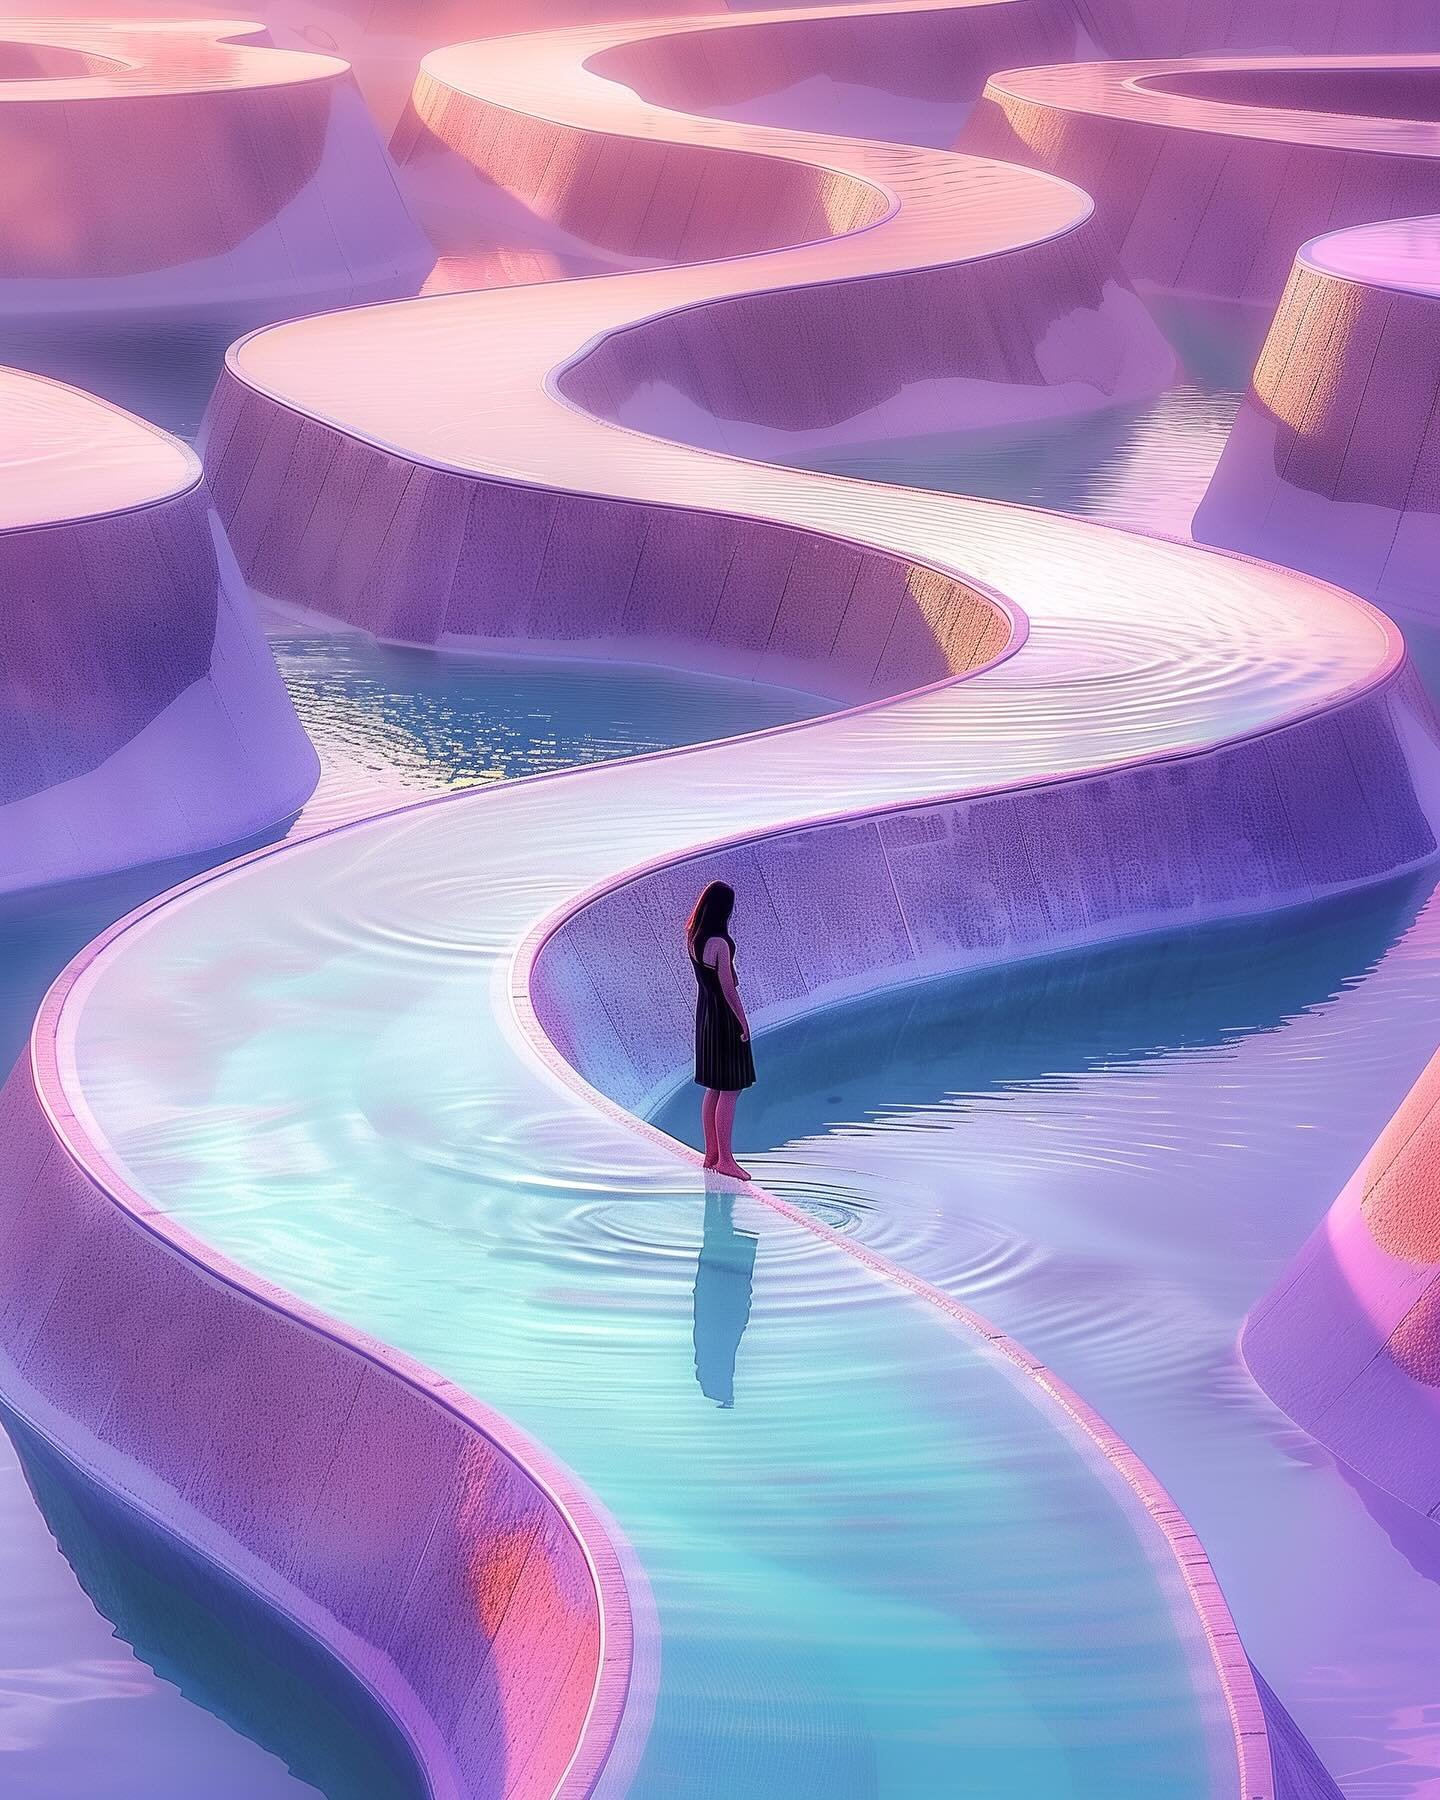 (dreaming about) pools that I'm not allowed to swim in.
.
.

#pools #surreal #dreaminterpretation